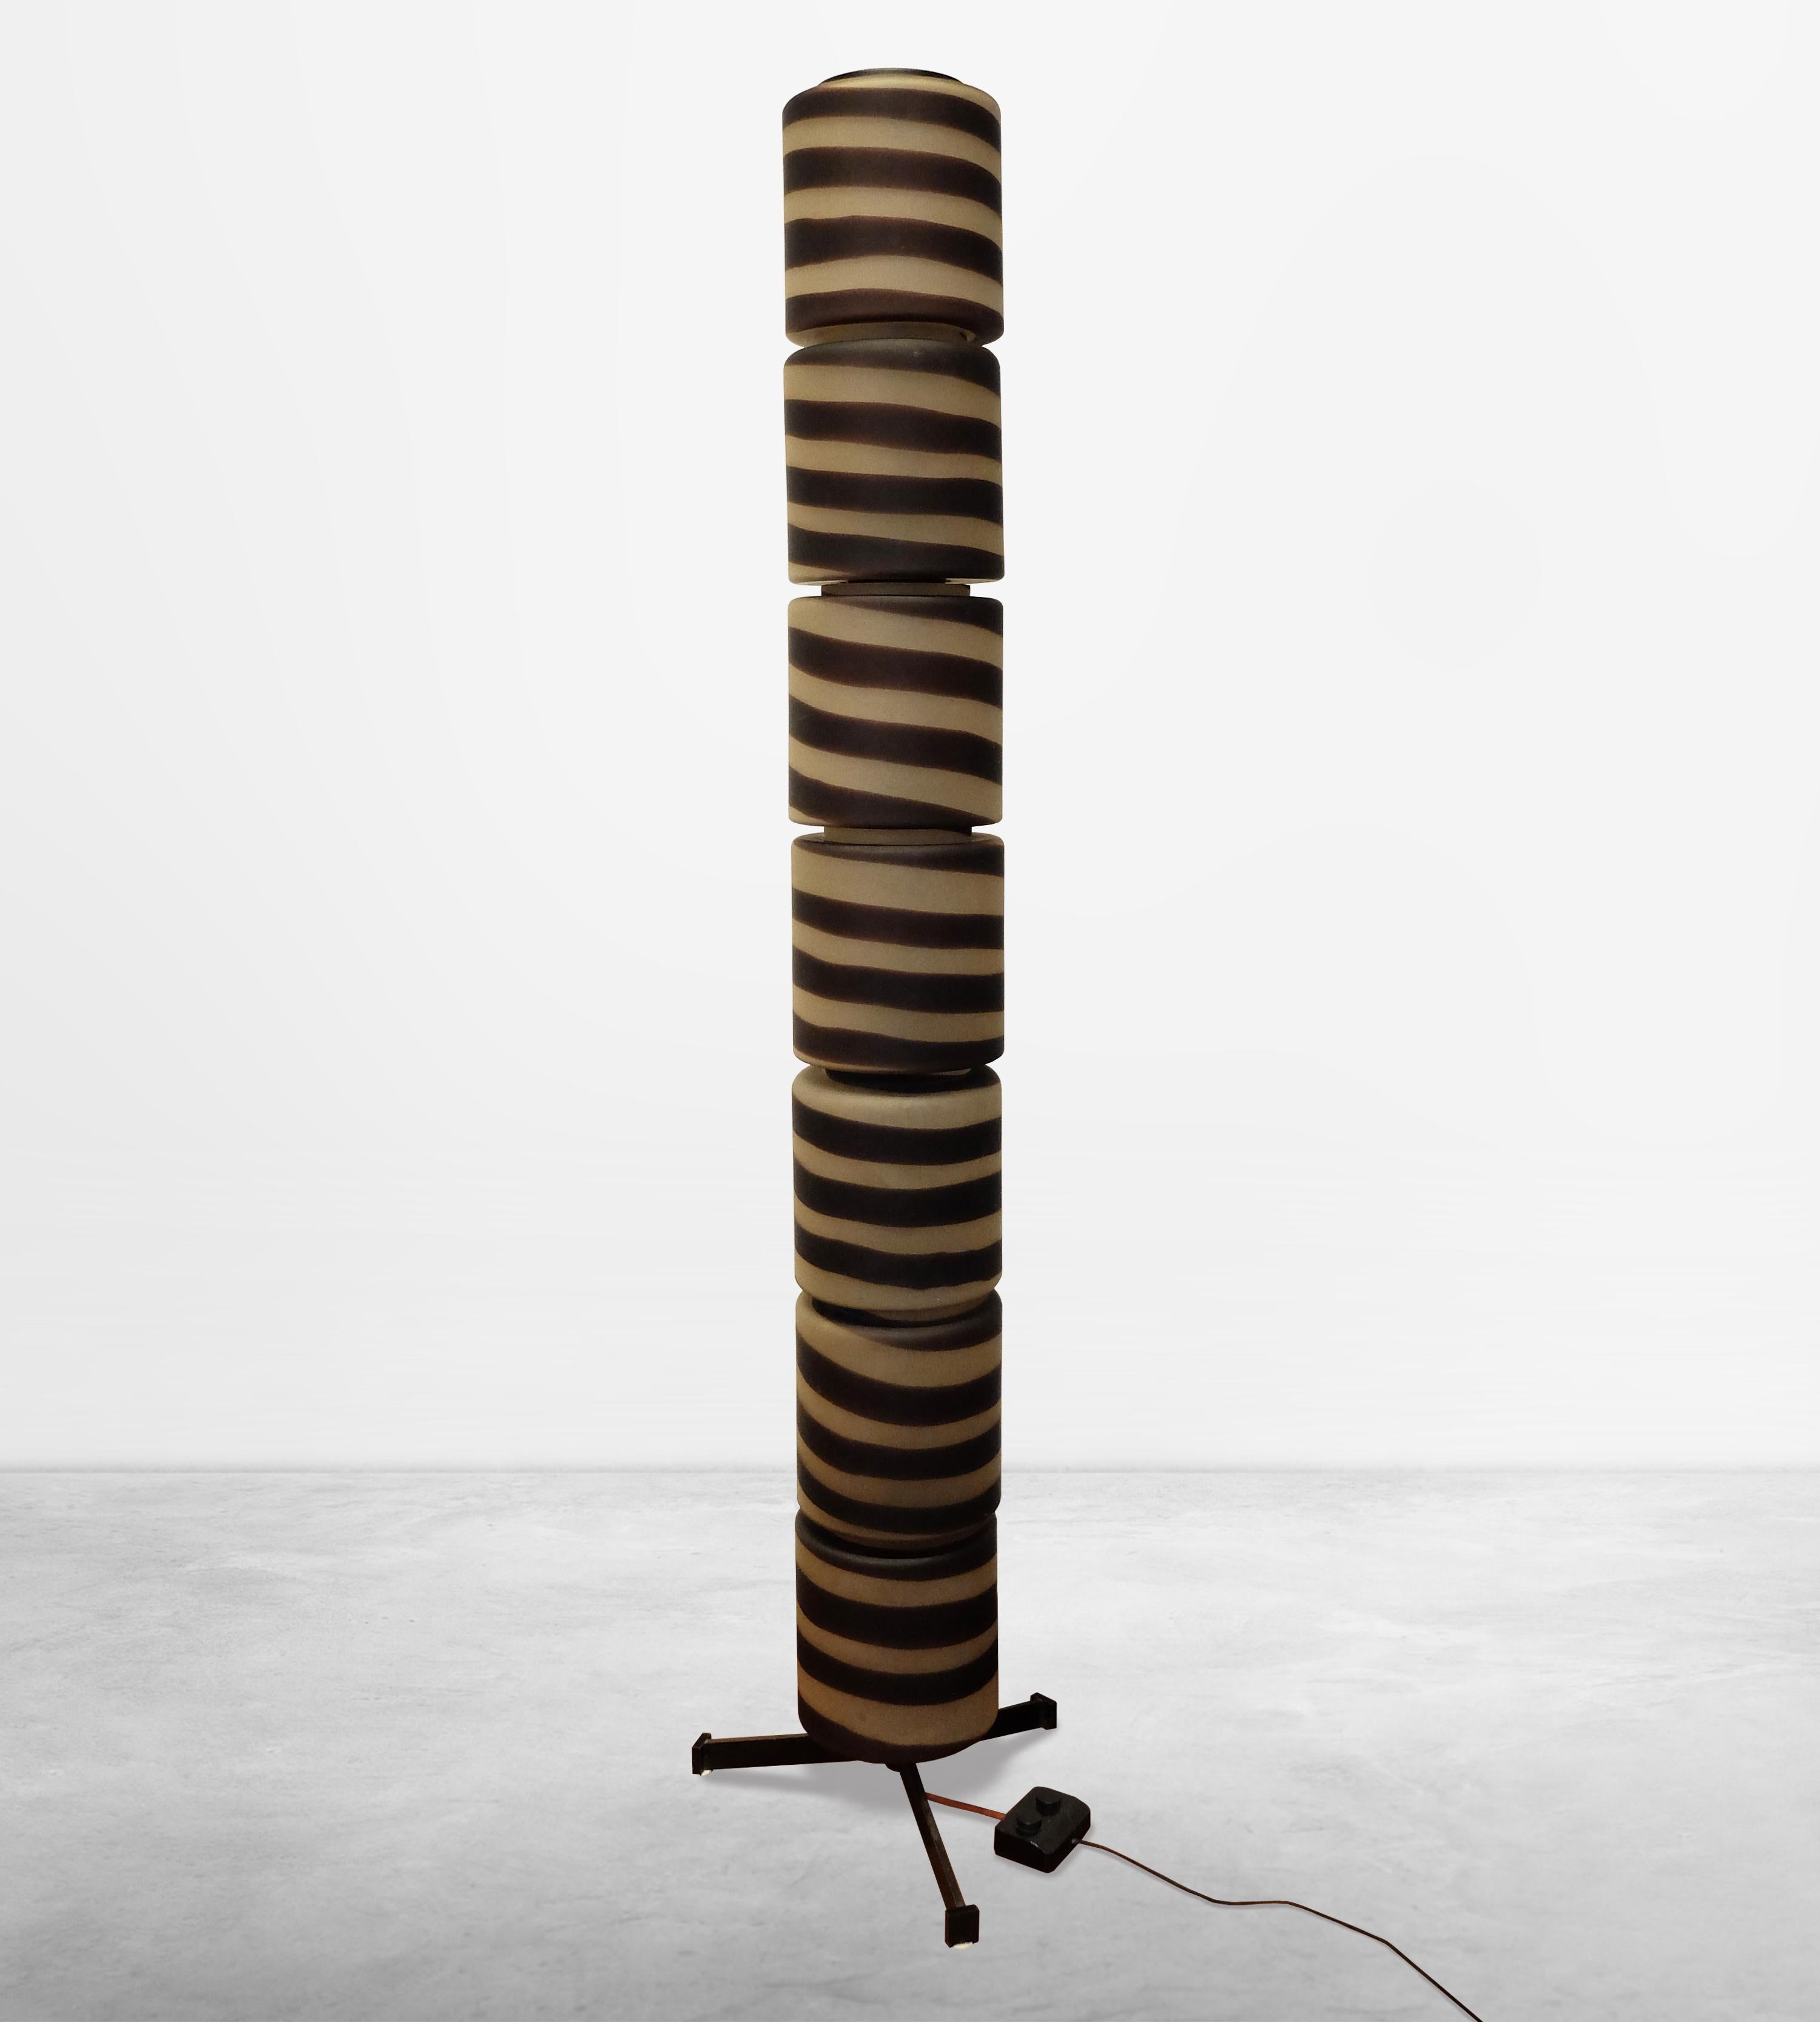 Italian Mid-Century Striped Glass Floor Lamp, circa 1950

This unique lamp consists of a central metal body and seven separate elements.  
The parts can be switched on separately from the controller in two different modes to allow partial